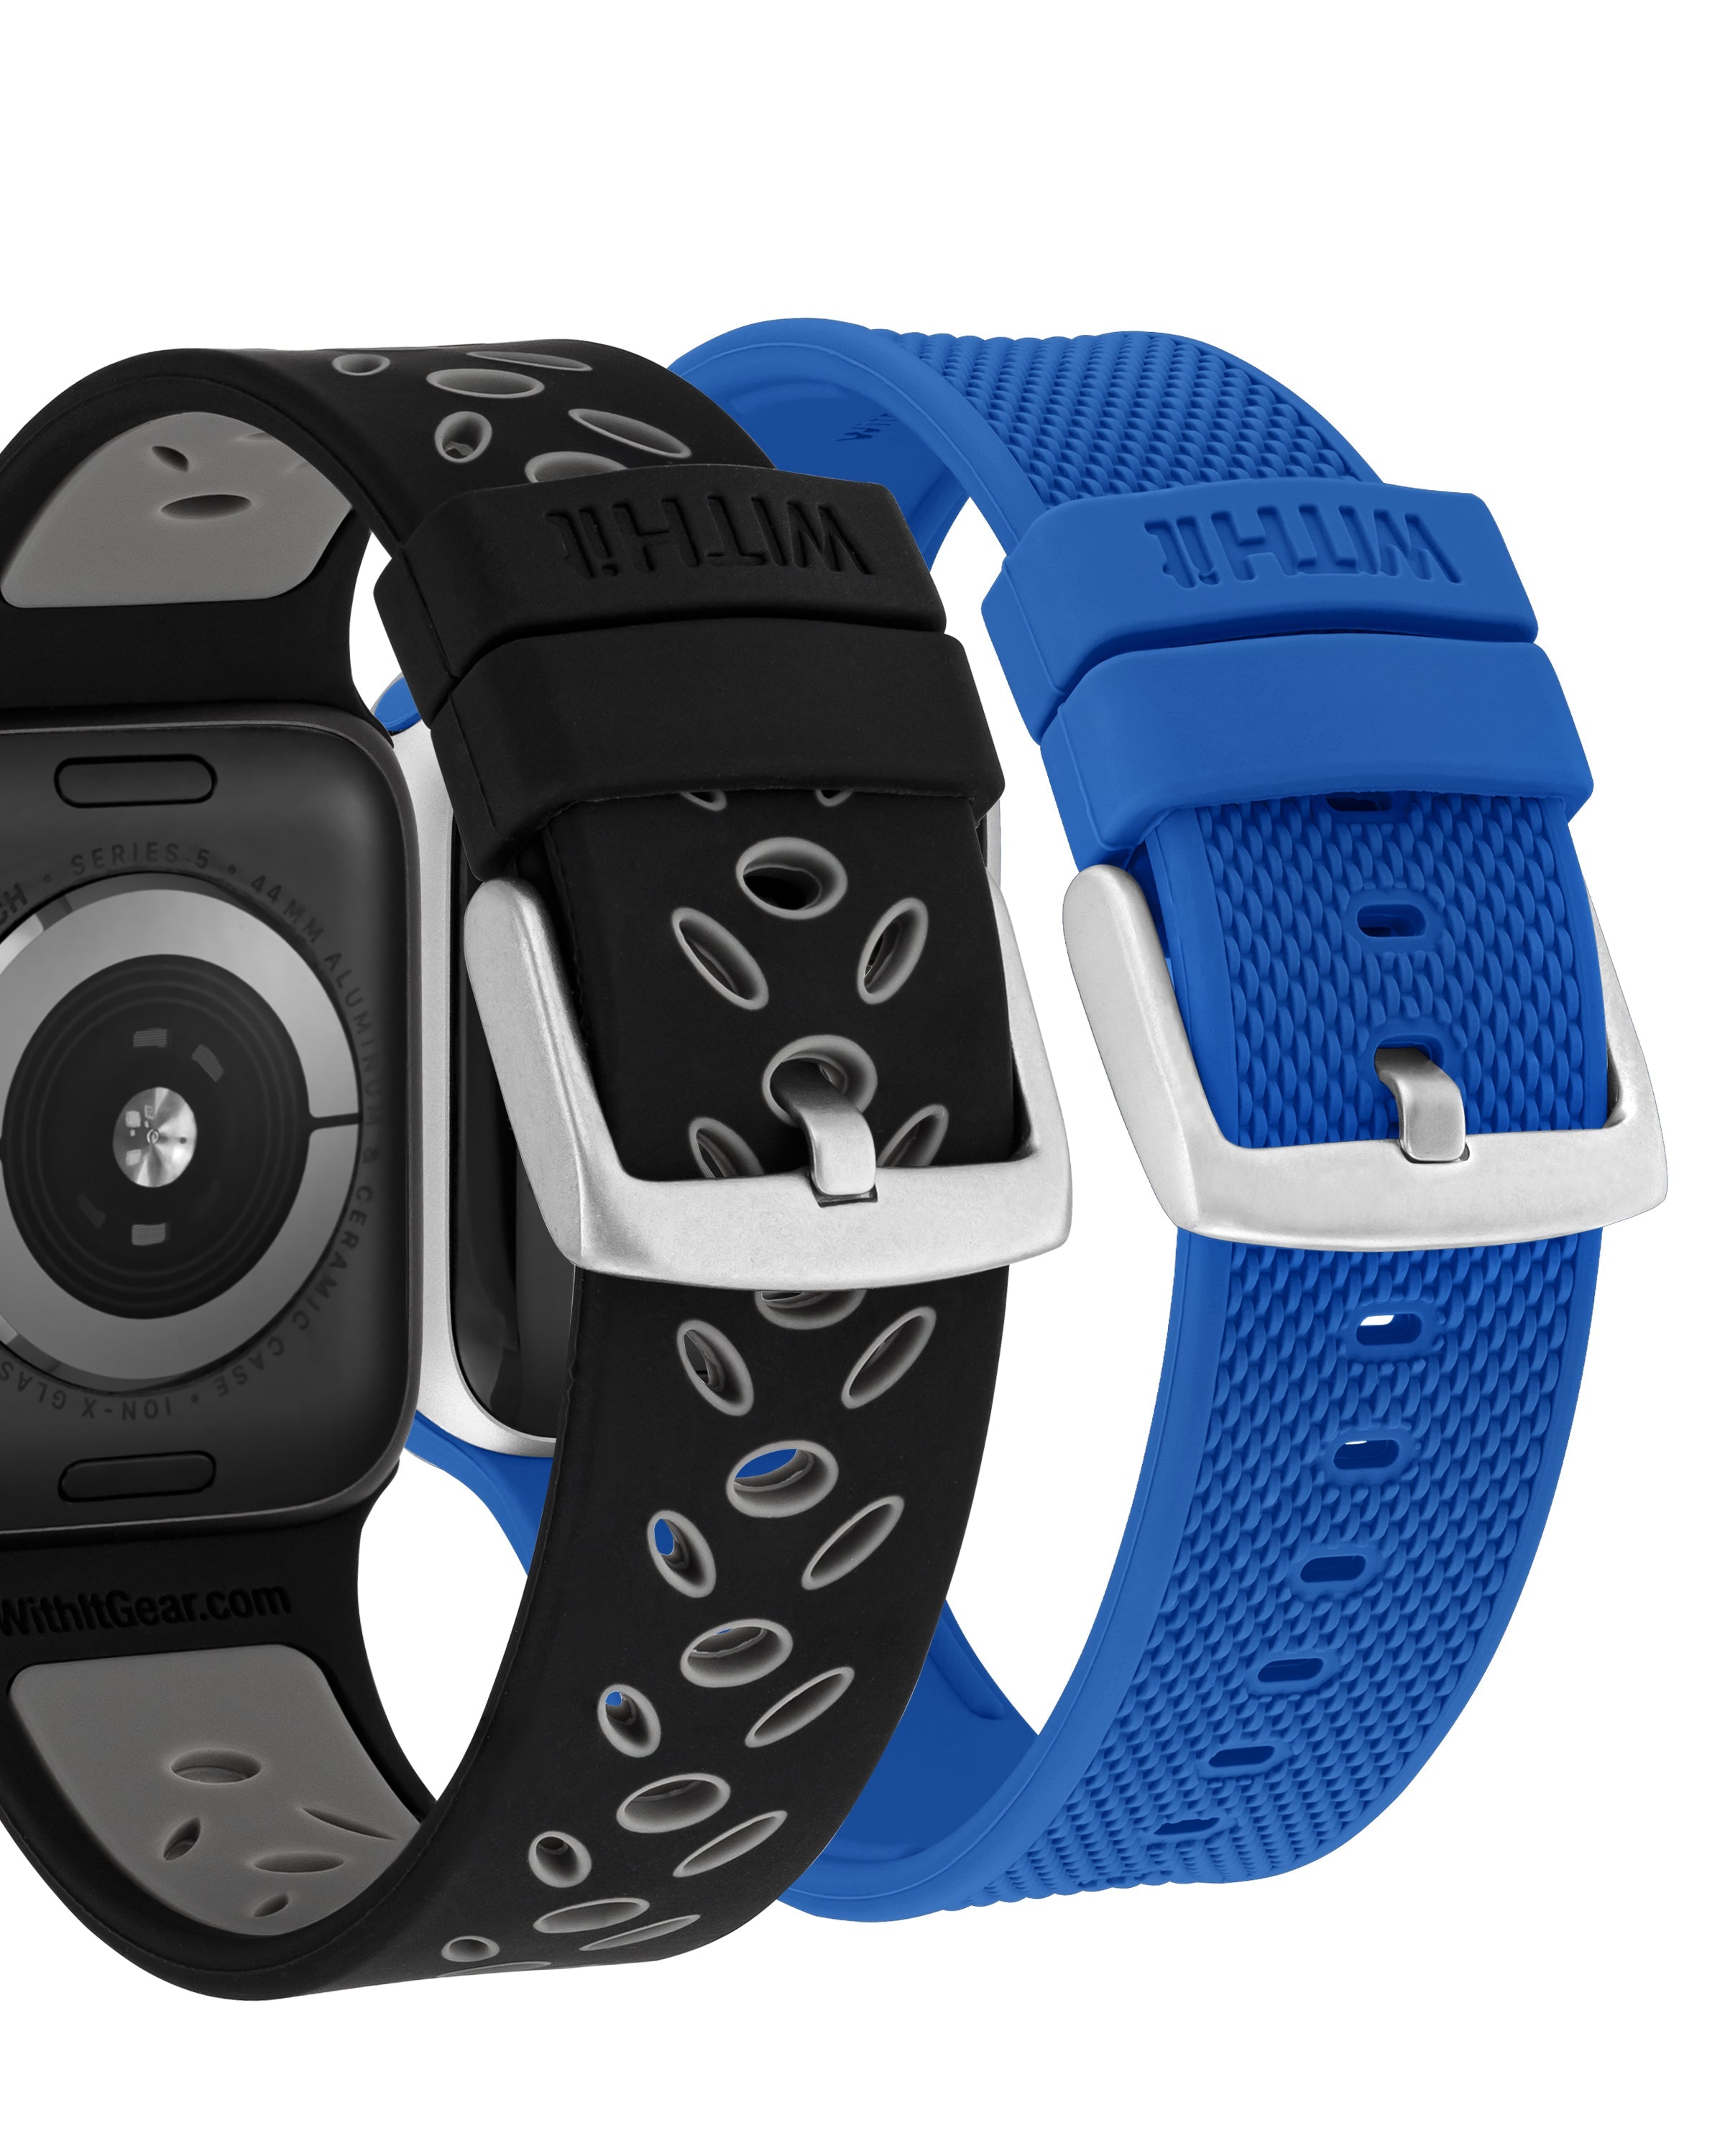 Sport & Woven Silicone Apple Watch Bands®, 2-Pack